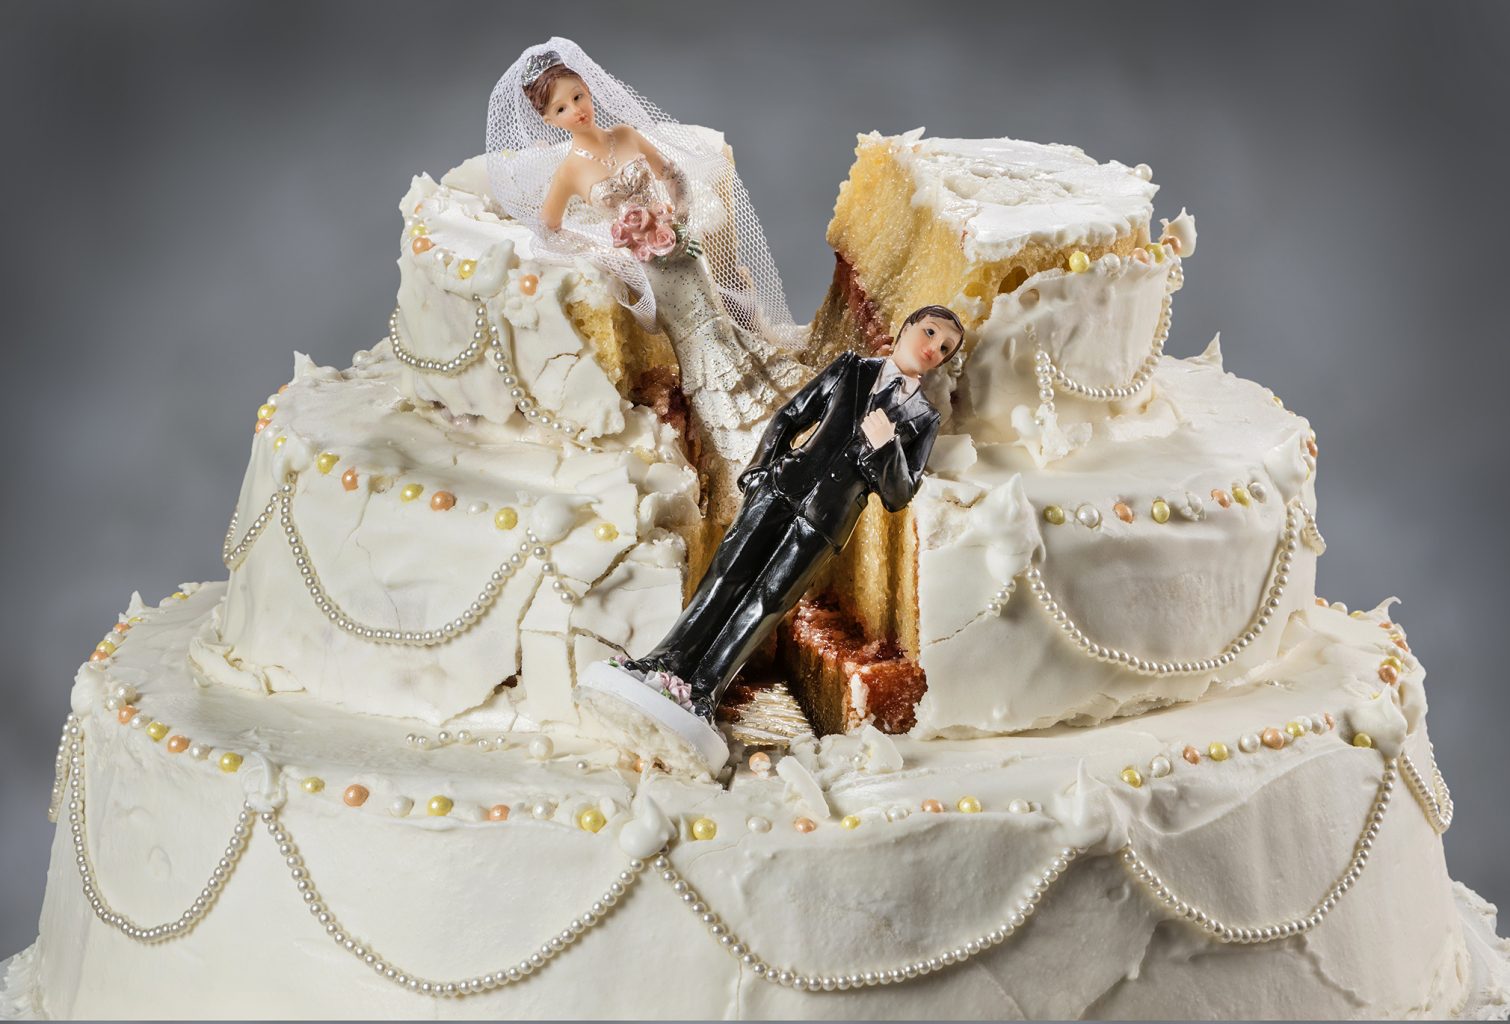 For Richer, For Poorer: The financial impact of divorce